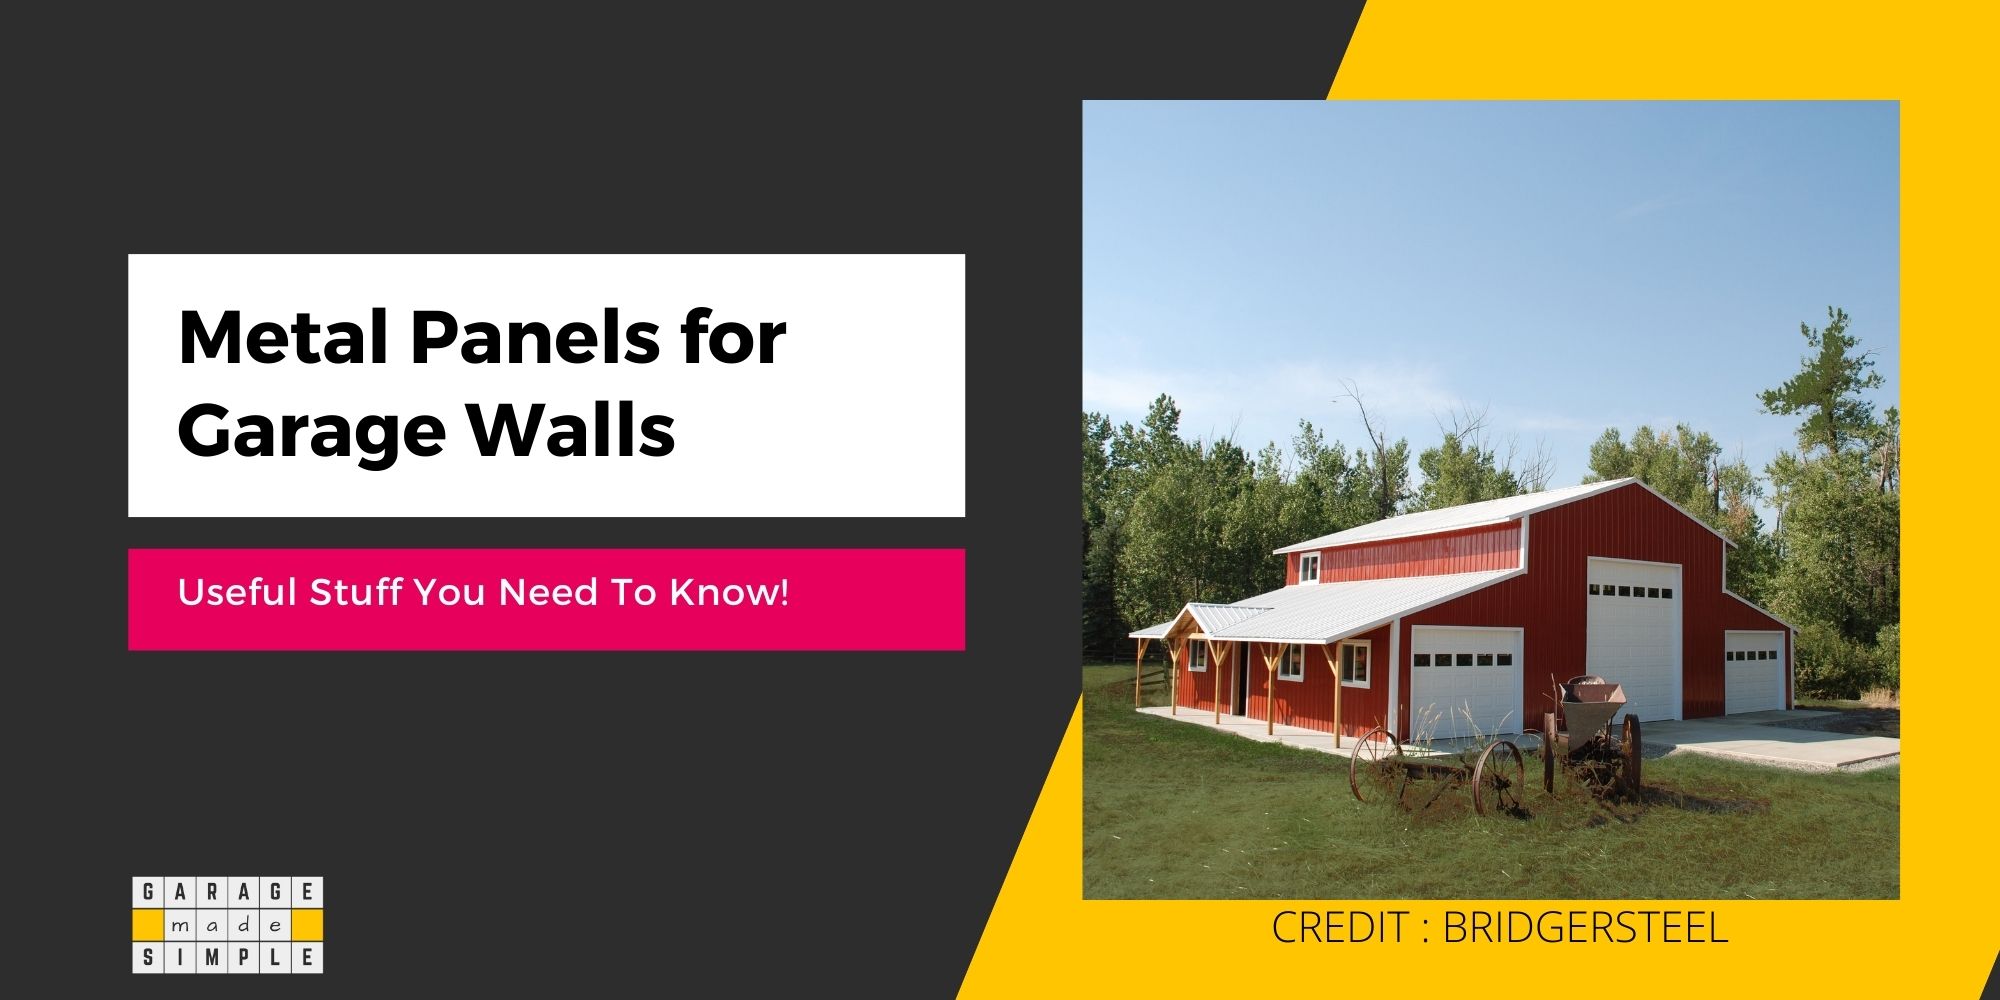 Metal Panels For Garage Walls (Useful Stuff You Need To Know)